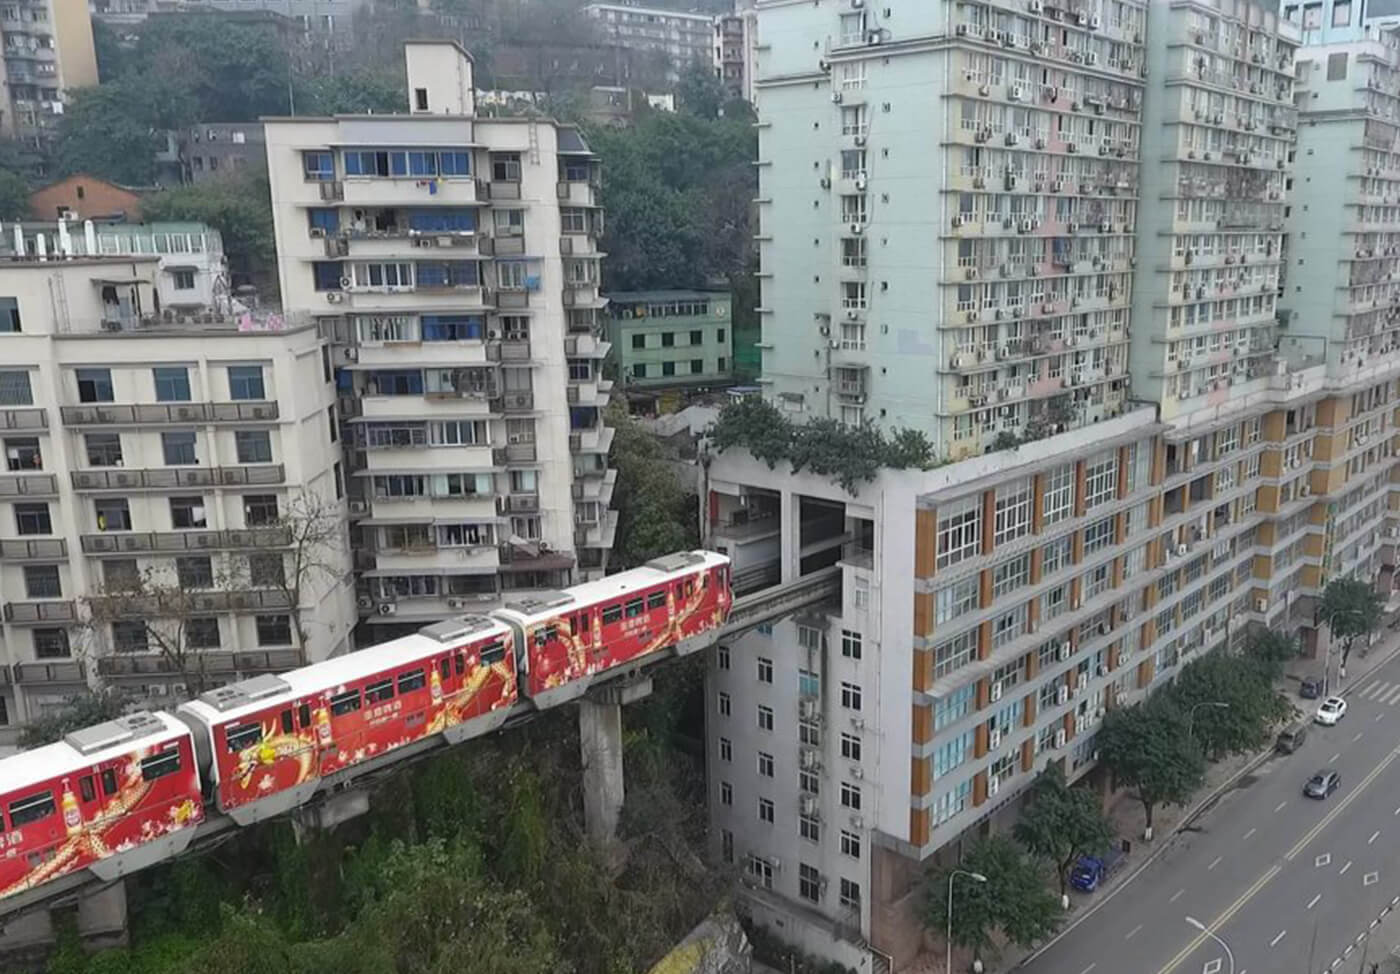 A subway in Chongqing passes through a building 3